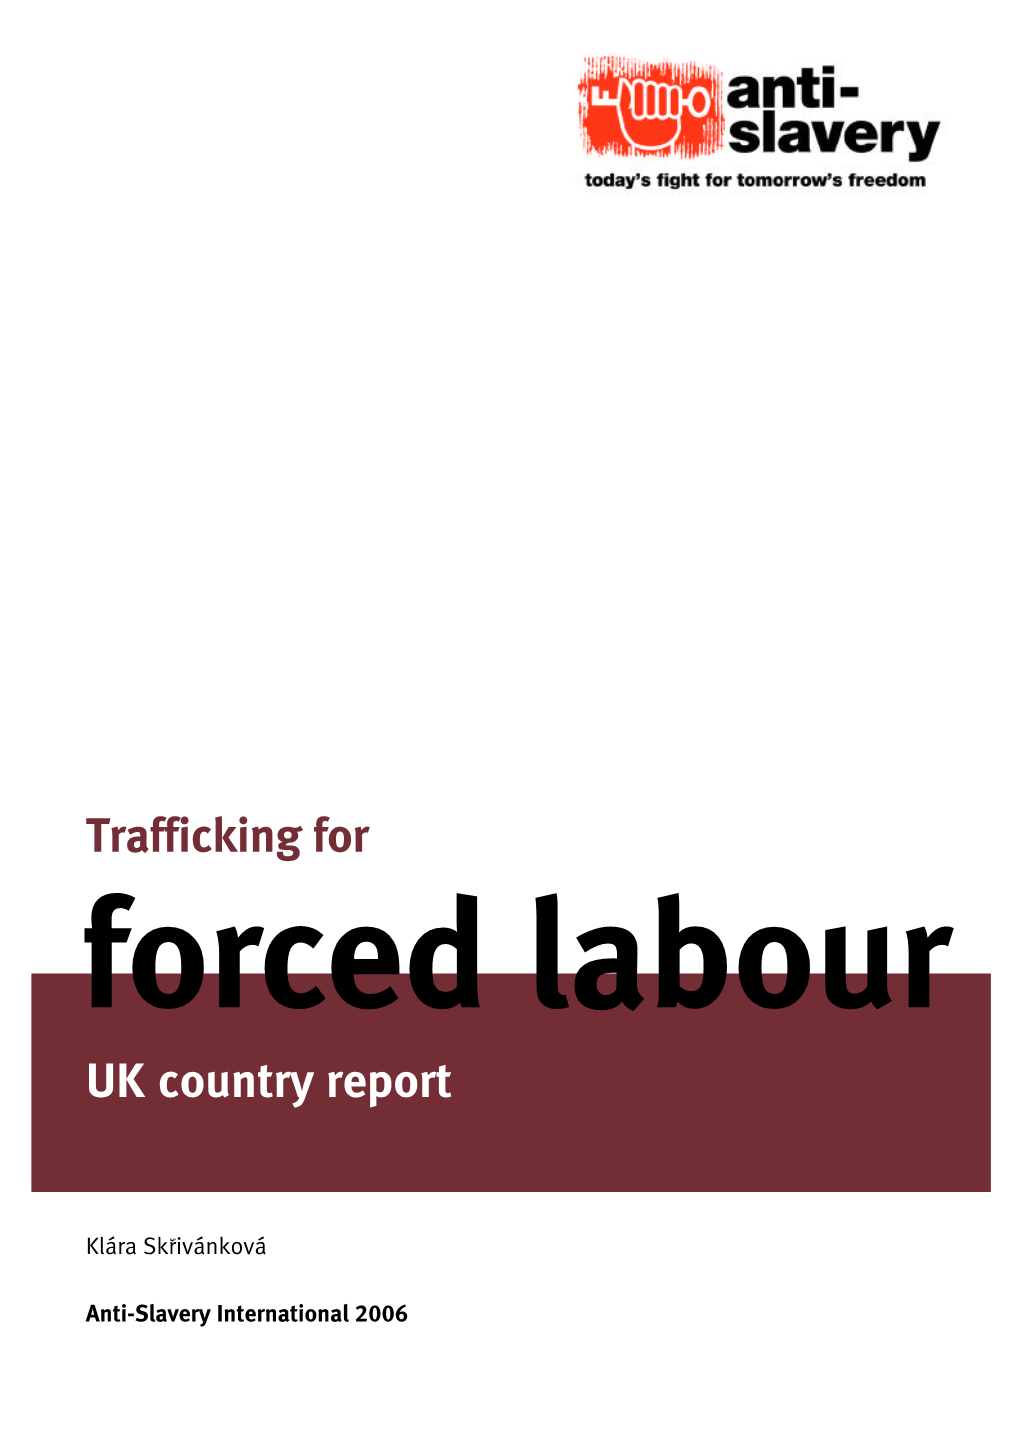 Trafficking for Forced Labour UK Country Report